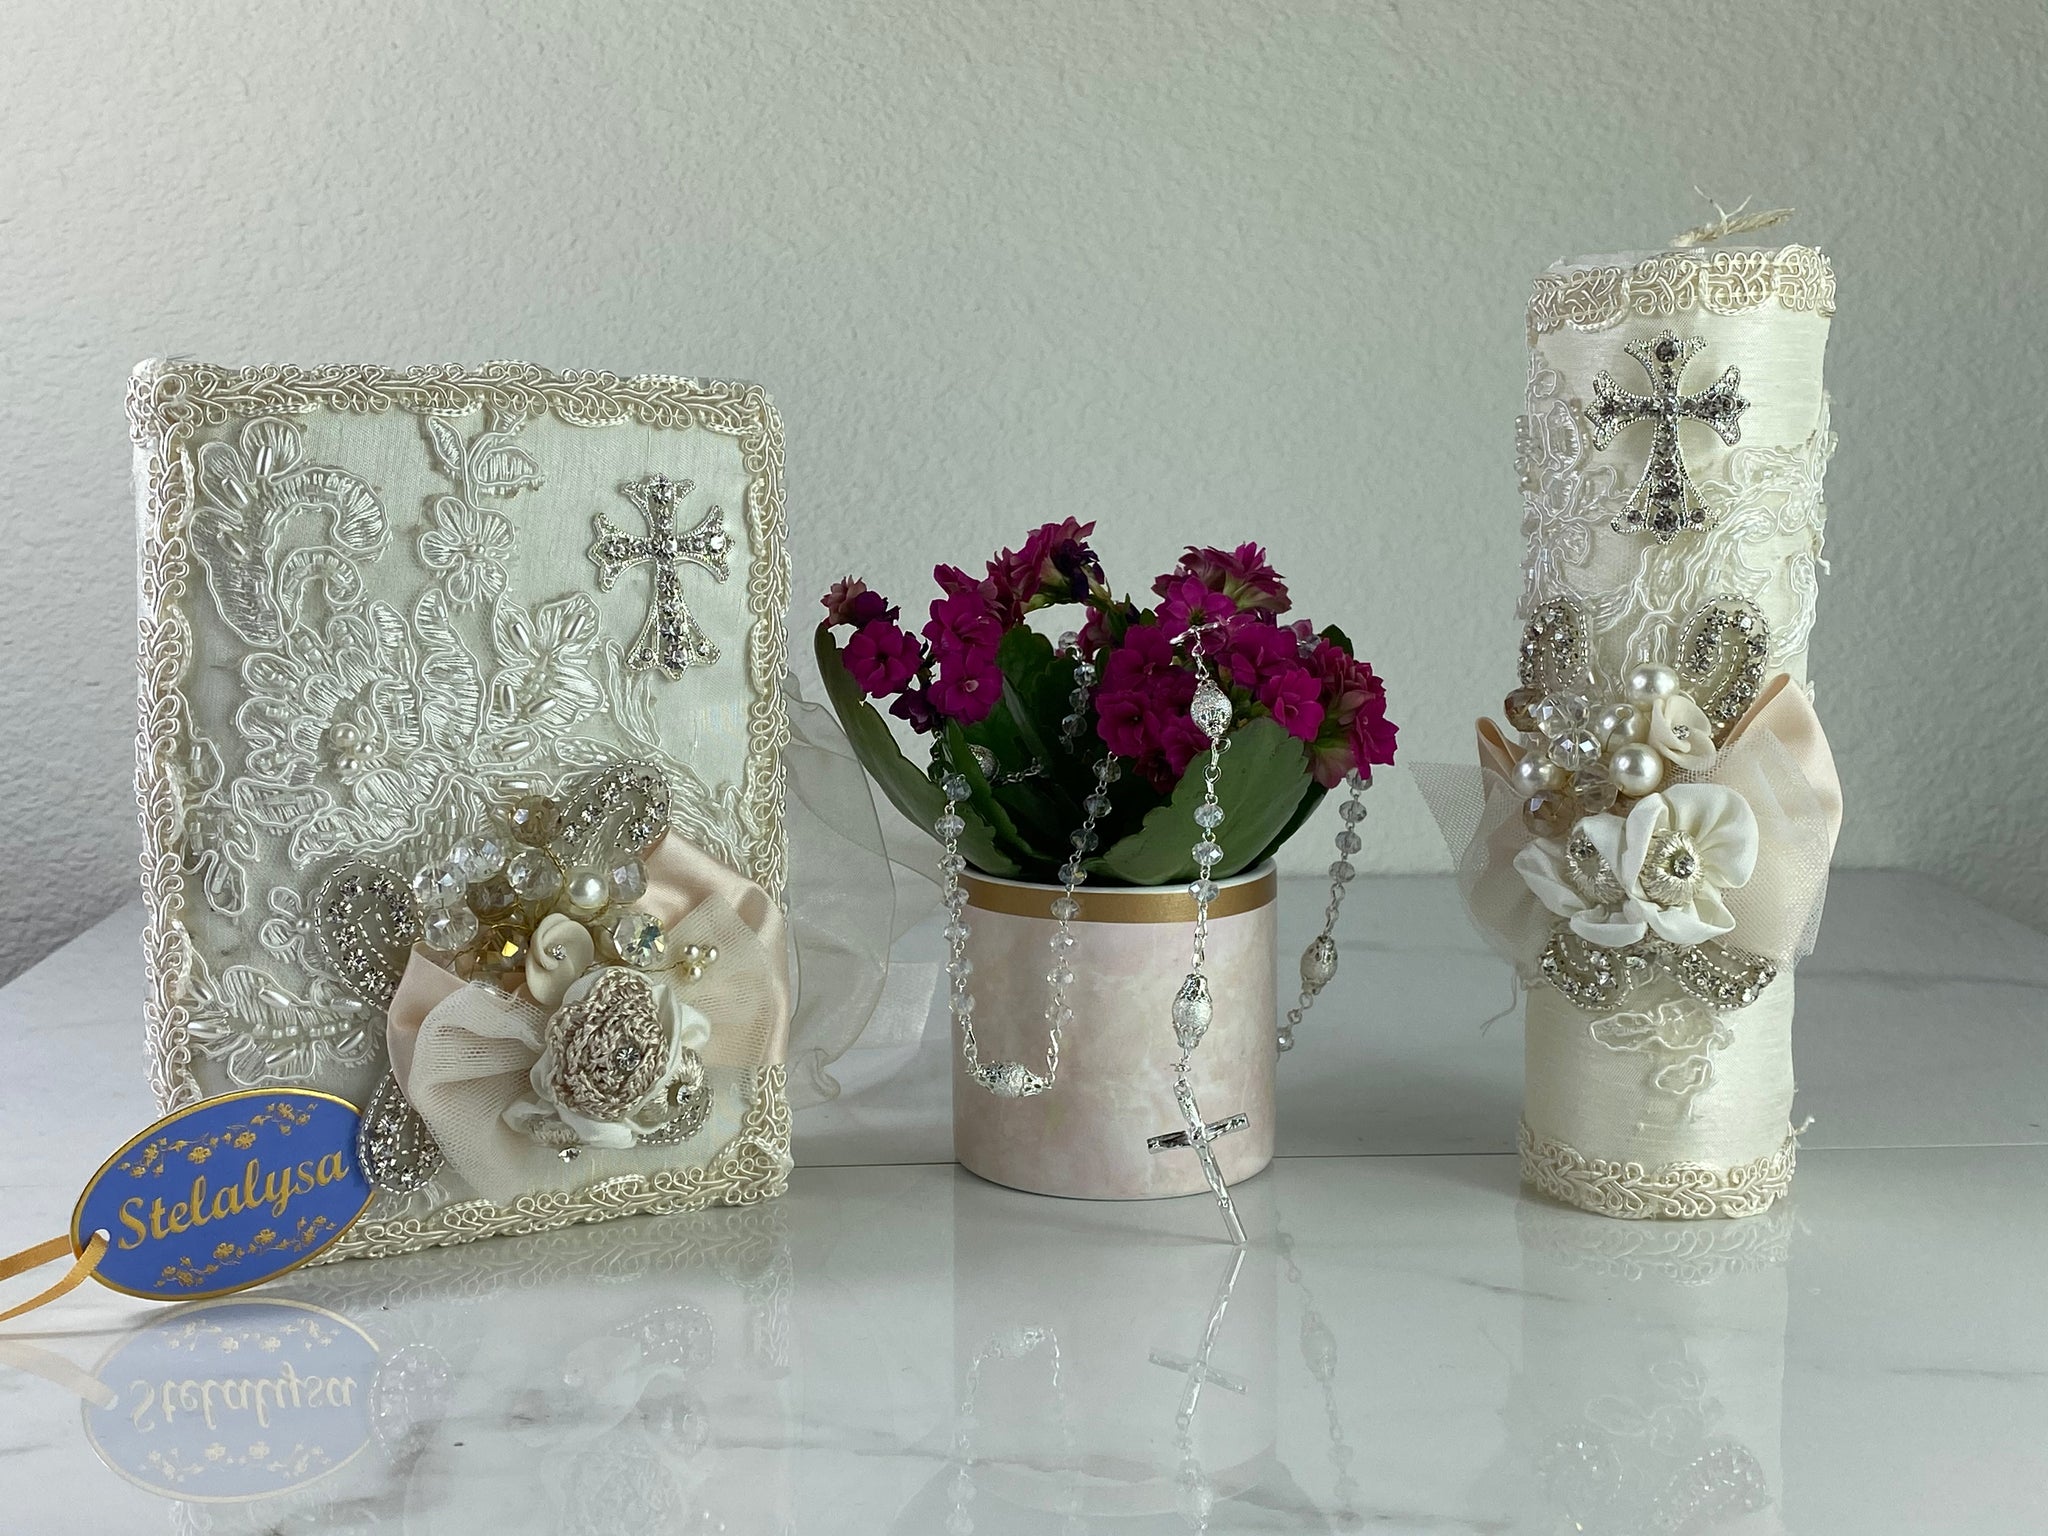 This ivory Bible Set - candle and bible is handmade and made using satin and lace.  It is elegantly designed with pearls, crystals, flowers in different pastel colors, and beads.  Each piece has a beautifully placed cross.  An elegant rosary complements this set.  The rosary is 16.5 in. long and Bible is 6.5 in. by 4.5 in. and the candles approximately the same height.  The Bible includes the Old and New Testament in English. 